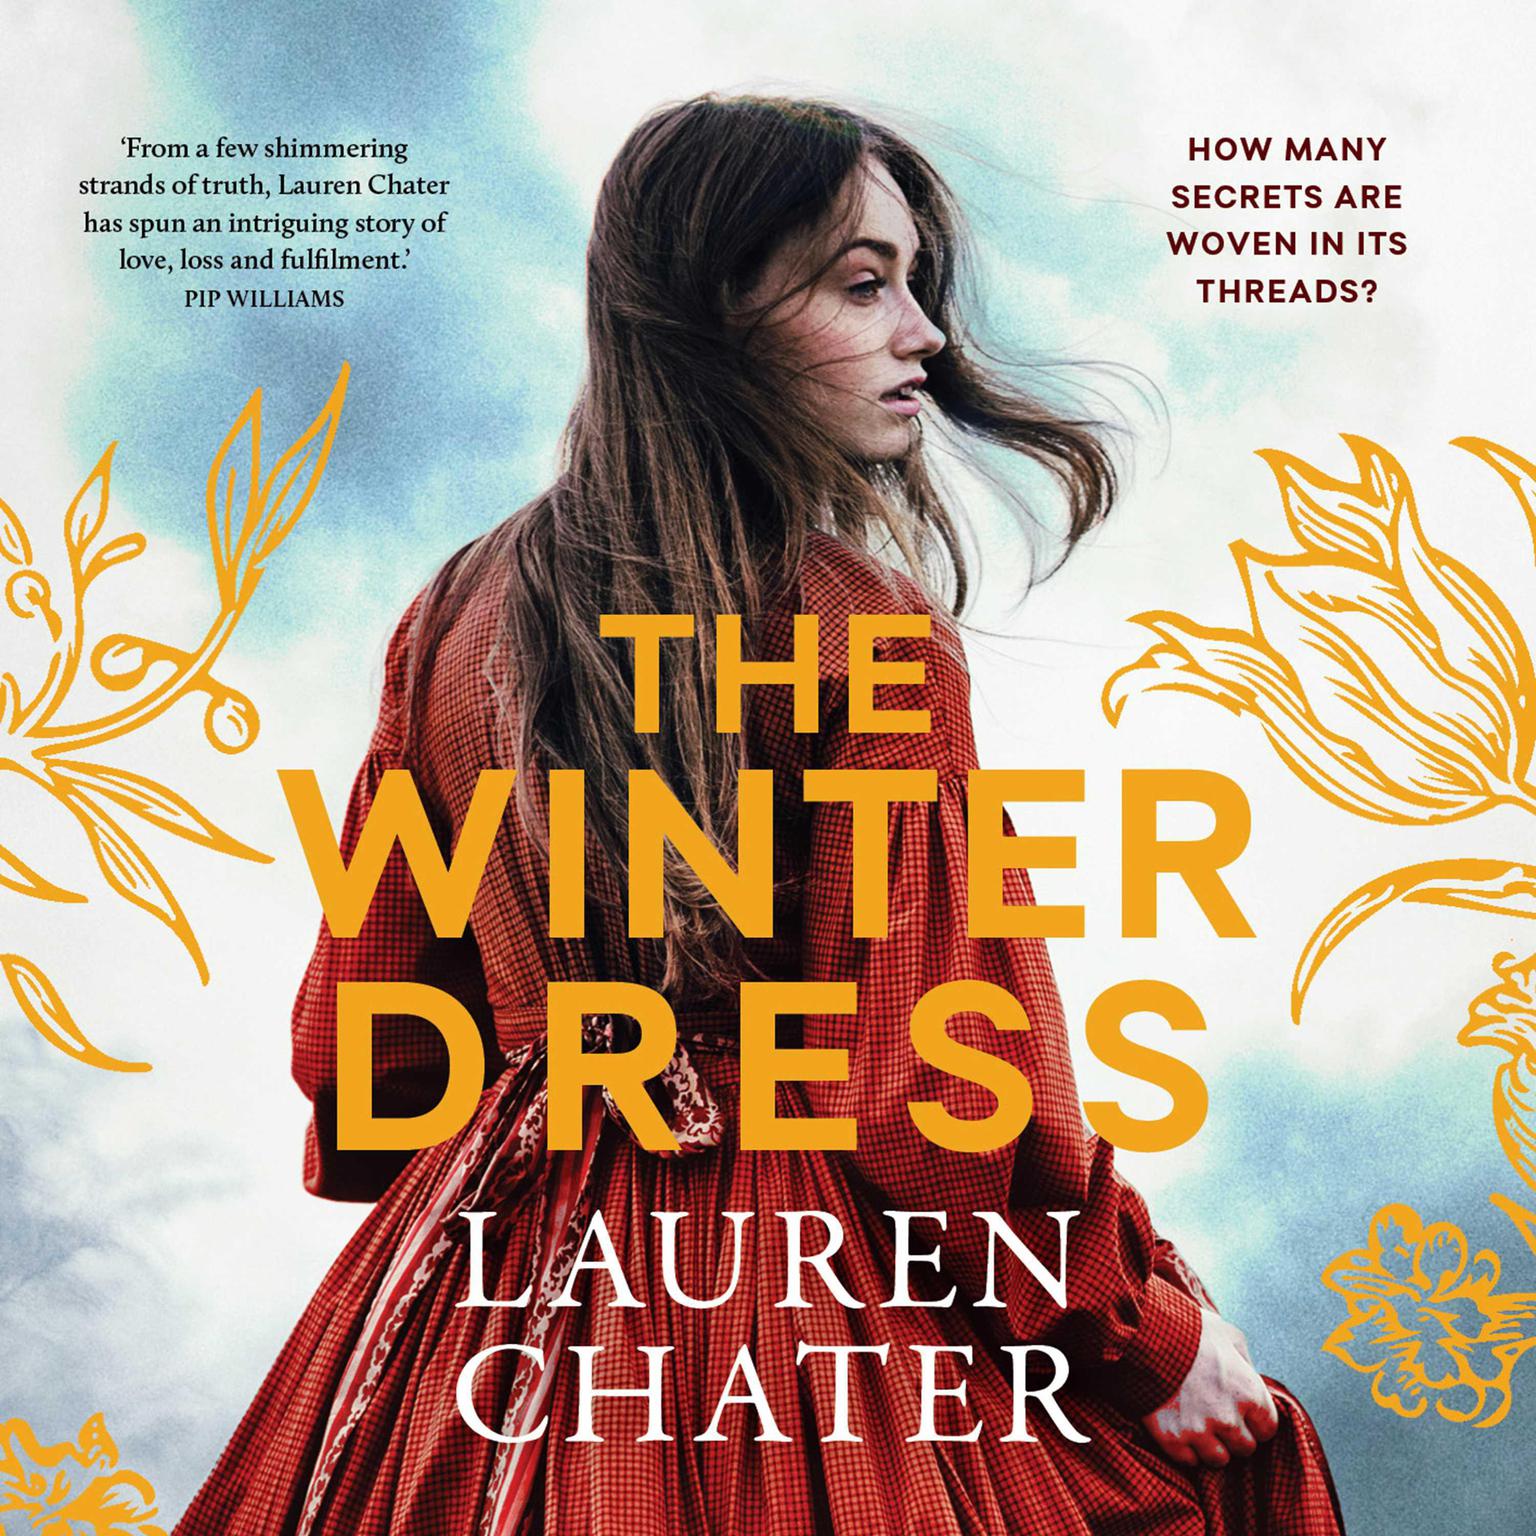 The Winter Dress Audiobook, by Lauren Chater